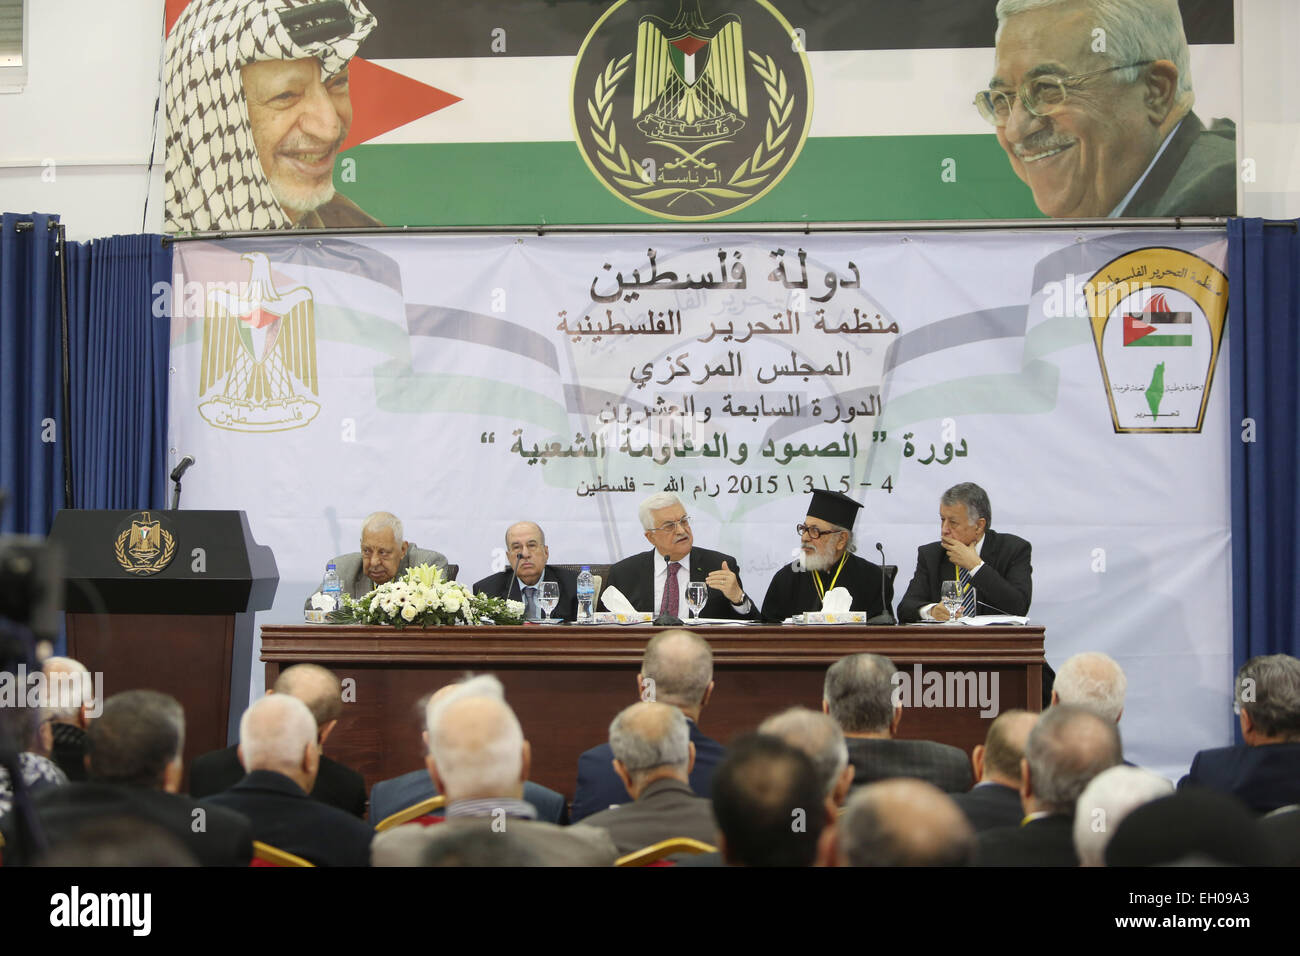 (150305) -- RAMALLAH, March 5, 2015 (Xinhua) -- Palestinian President Mahmoud Abbas (C-back) speaks during the meeting of the Central Council of Palestine Liberation Organization (PLO) in the West Bank city of Ramallah, Mar. 4, 2015. Abbas called on the PLO Central Council to reconsider the functions of the Palestinian National Authority (PNA) on Wednesday. (Xinhua/Fadi Arouri) (zjy) Stock Photo